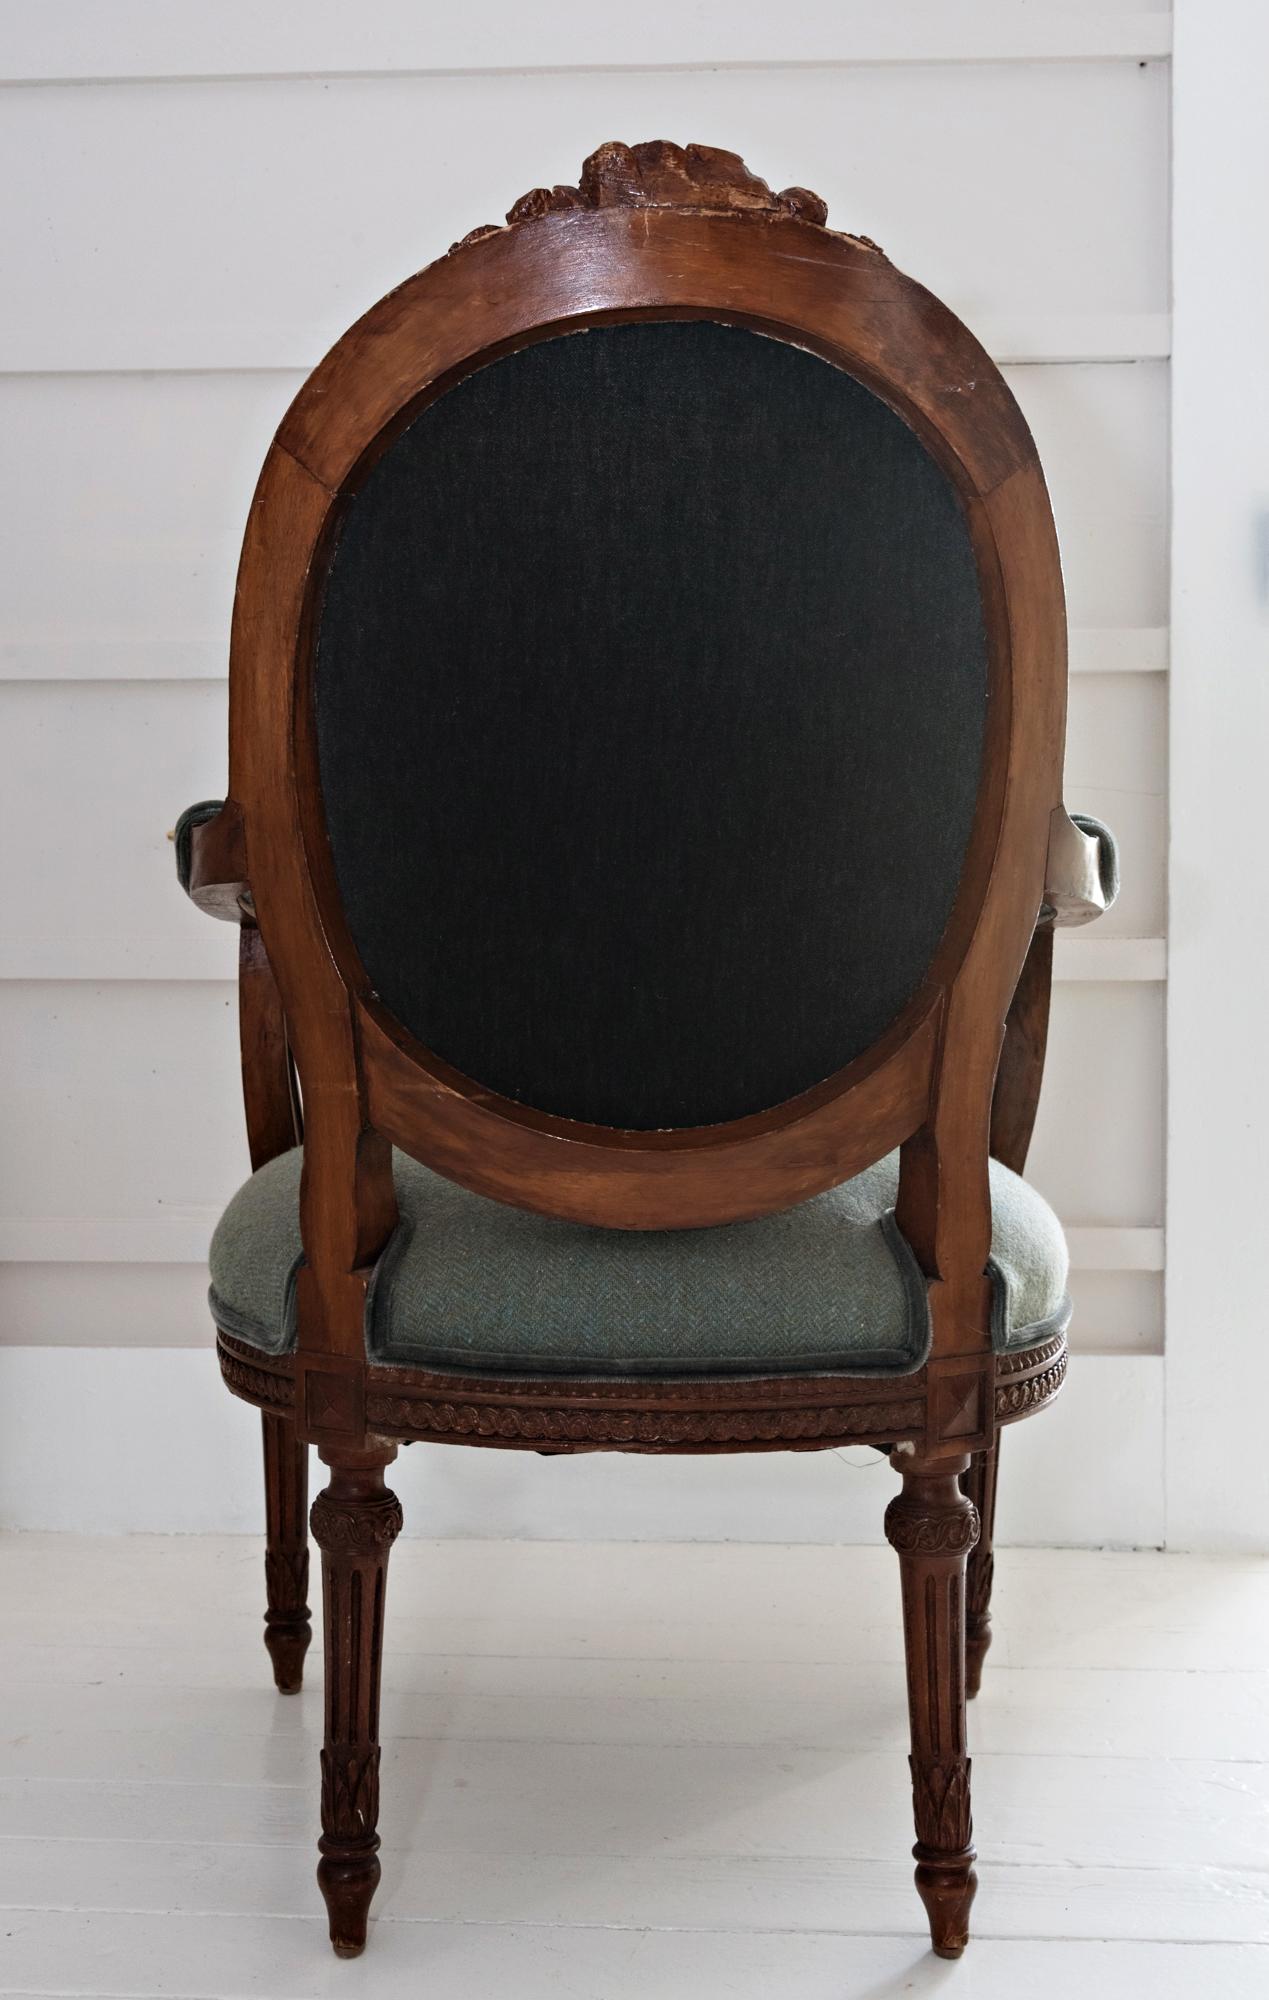 19th century carved walnut Louis XVI side chair covered in Ralph Lauren teal Mohair with contrasting teal tweed on back medallion of chair. Lovely French bow, scroll detail and flowers.
Note: see also matching....
French, 19th century Louis XVI